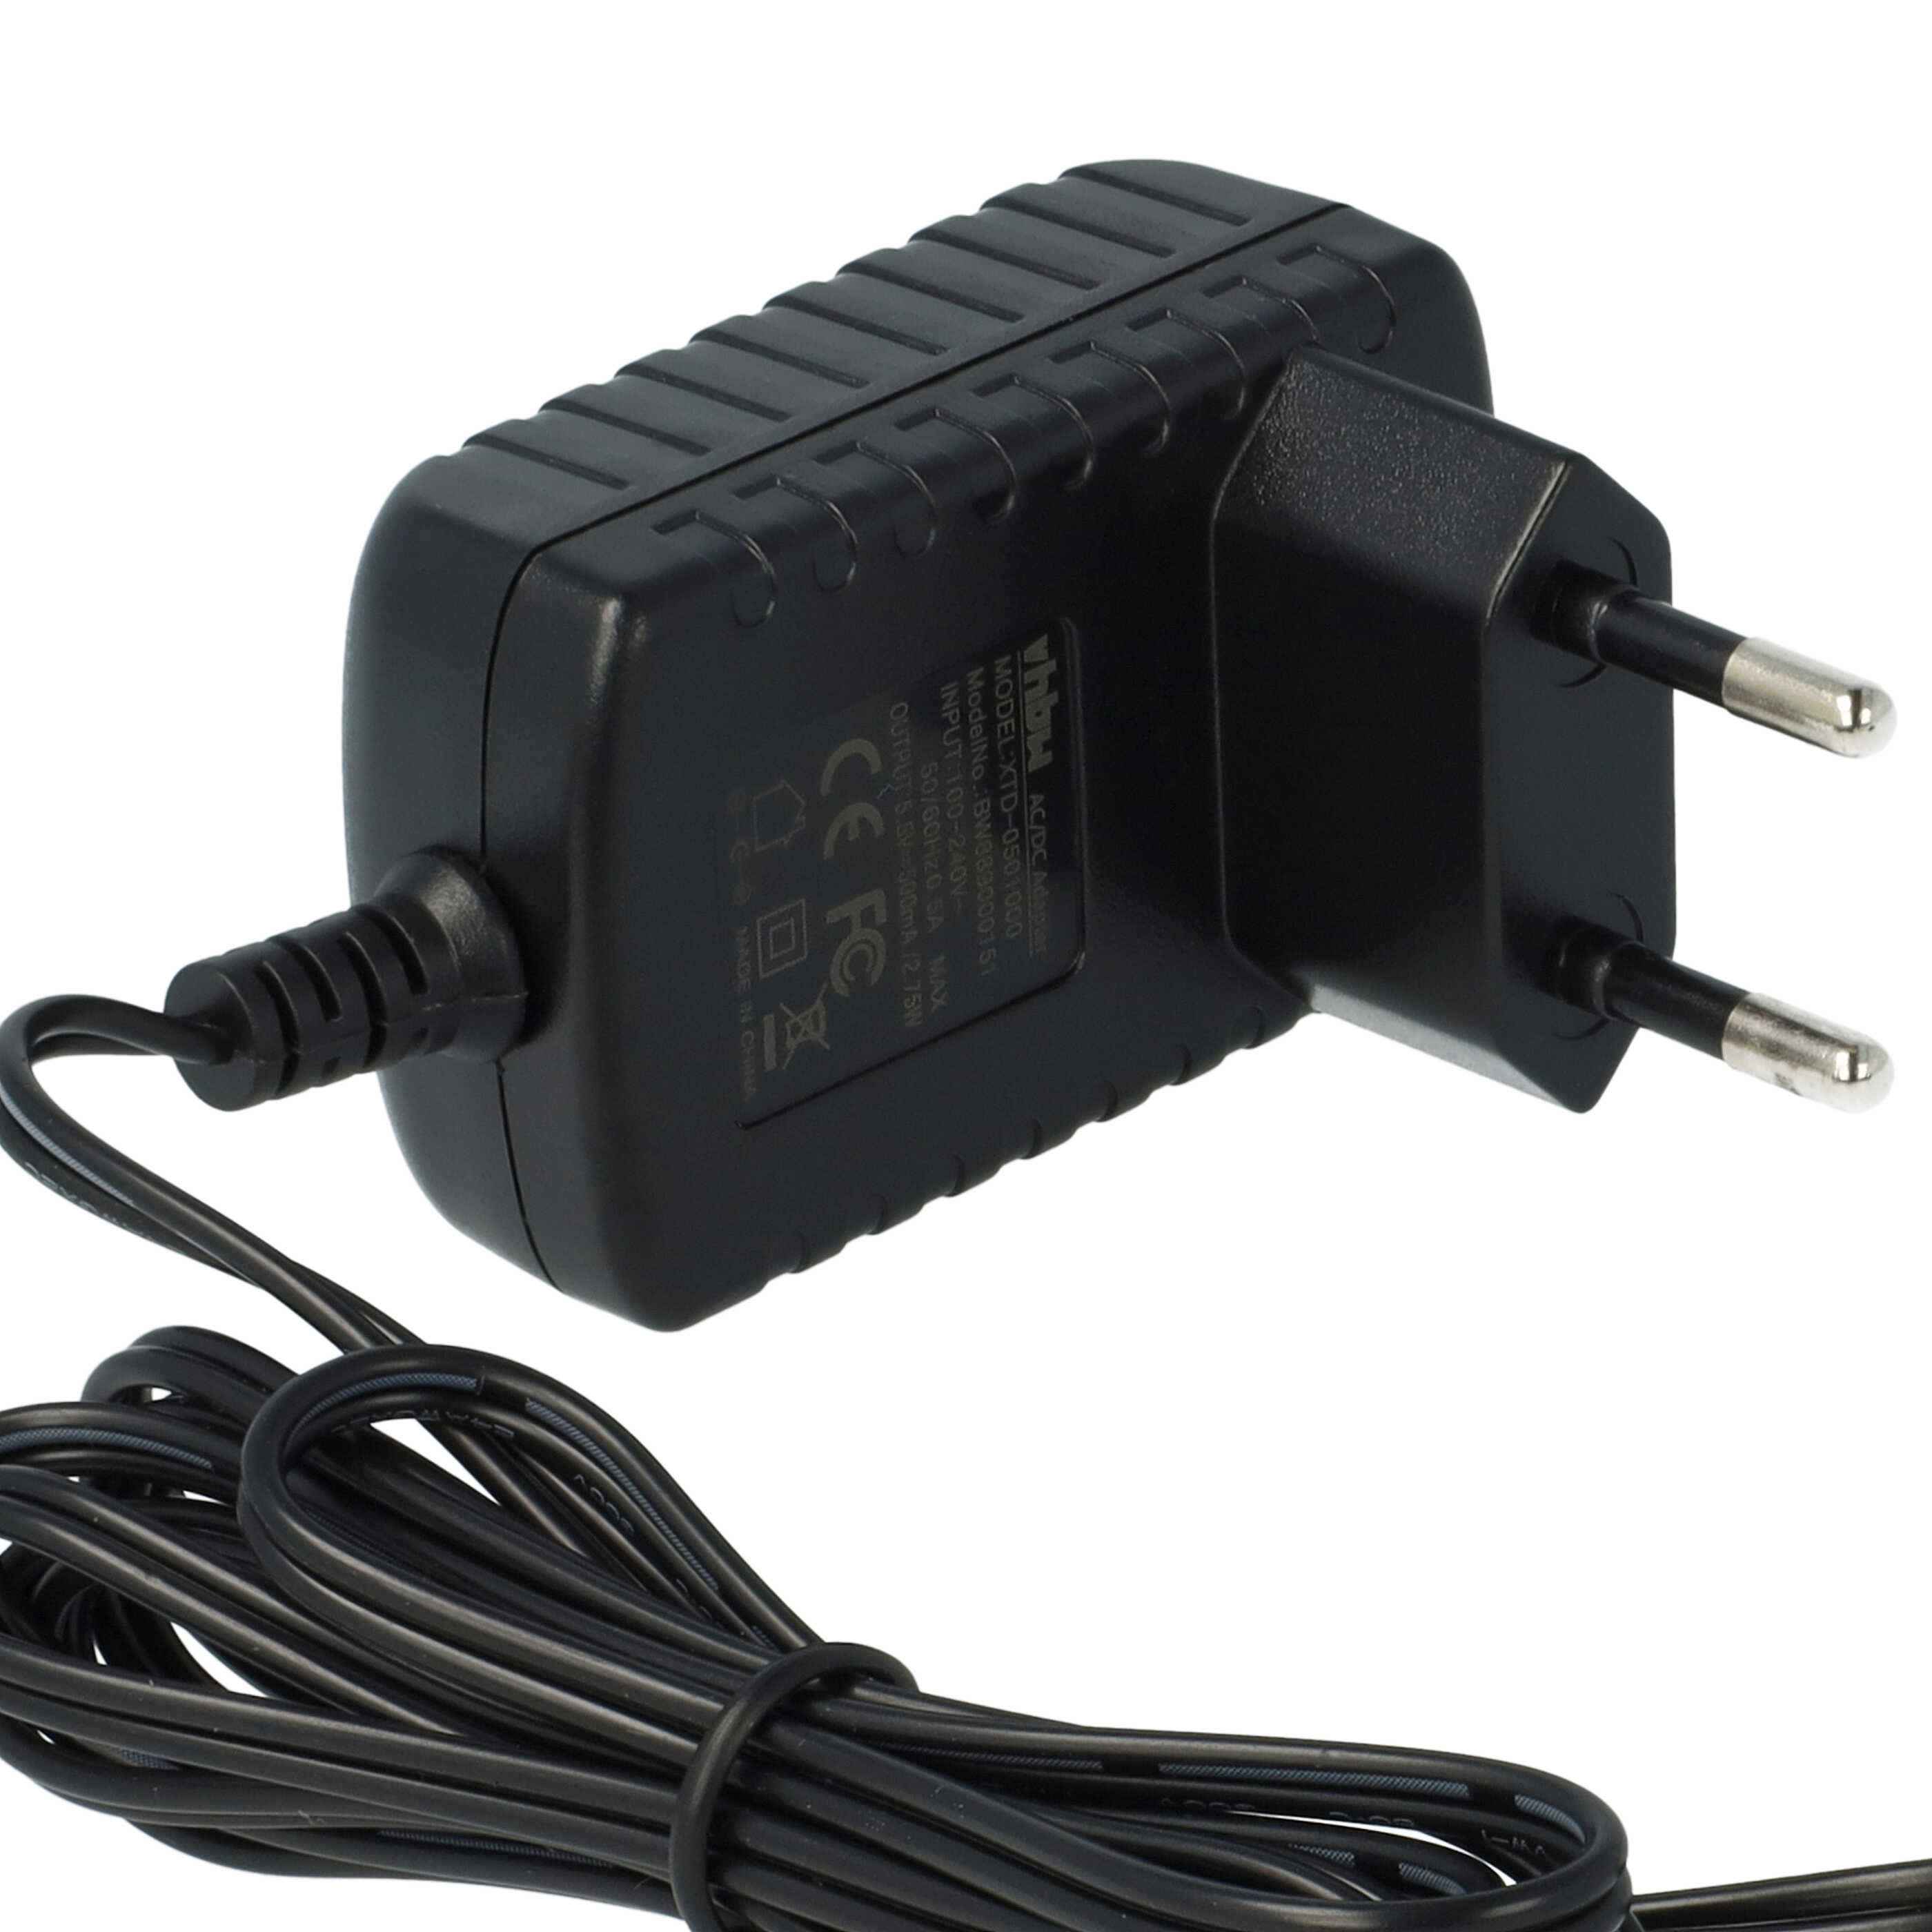 Mains Power Adapter / Charger suitable for Gardena AccuCut Li for GardenaGrass Shears